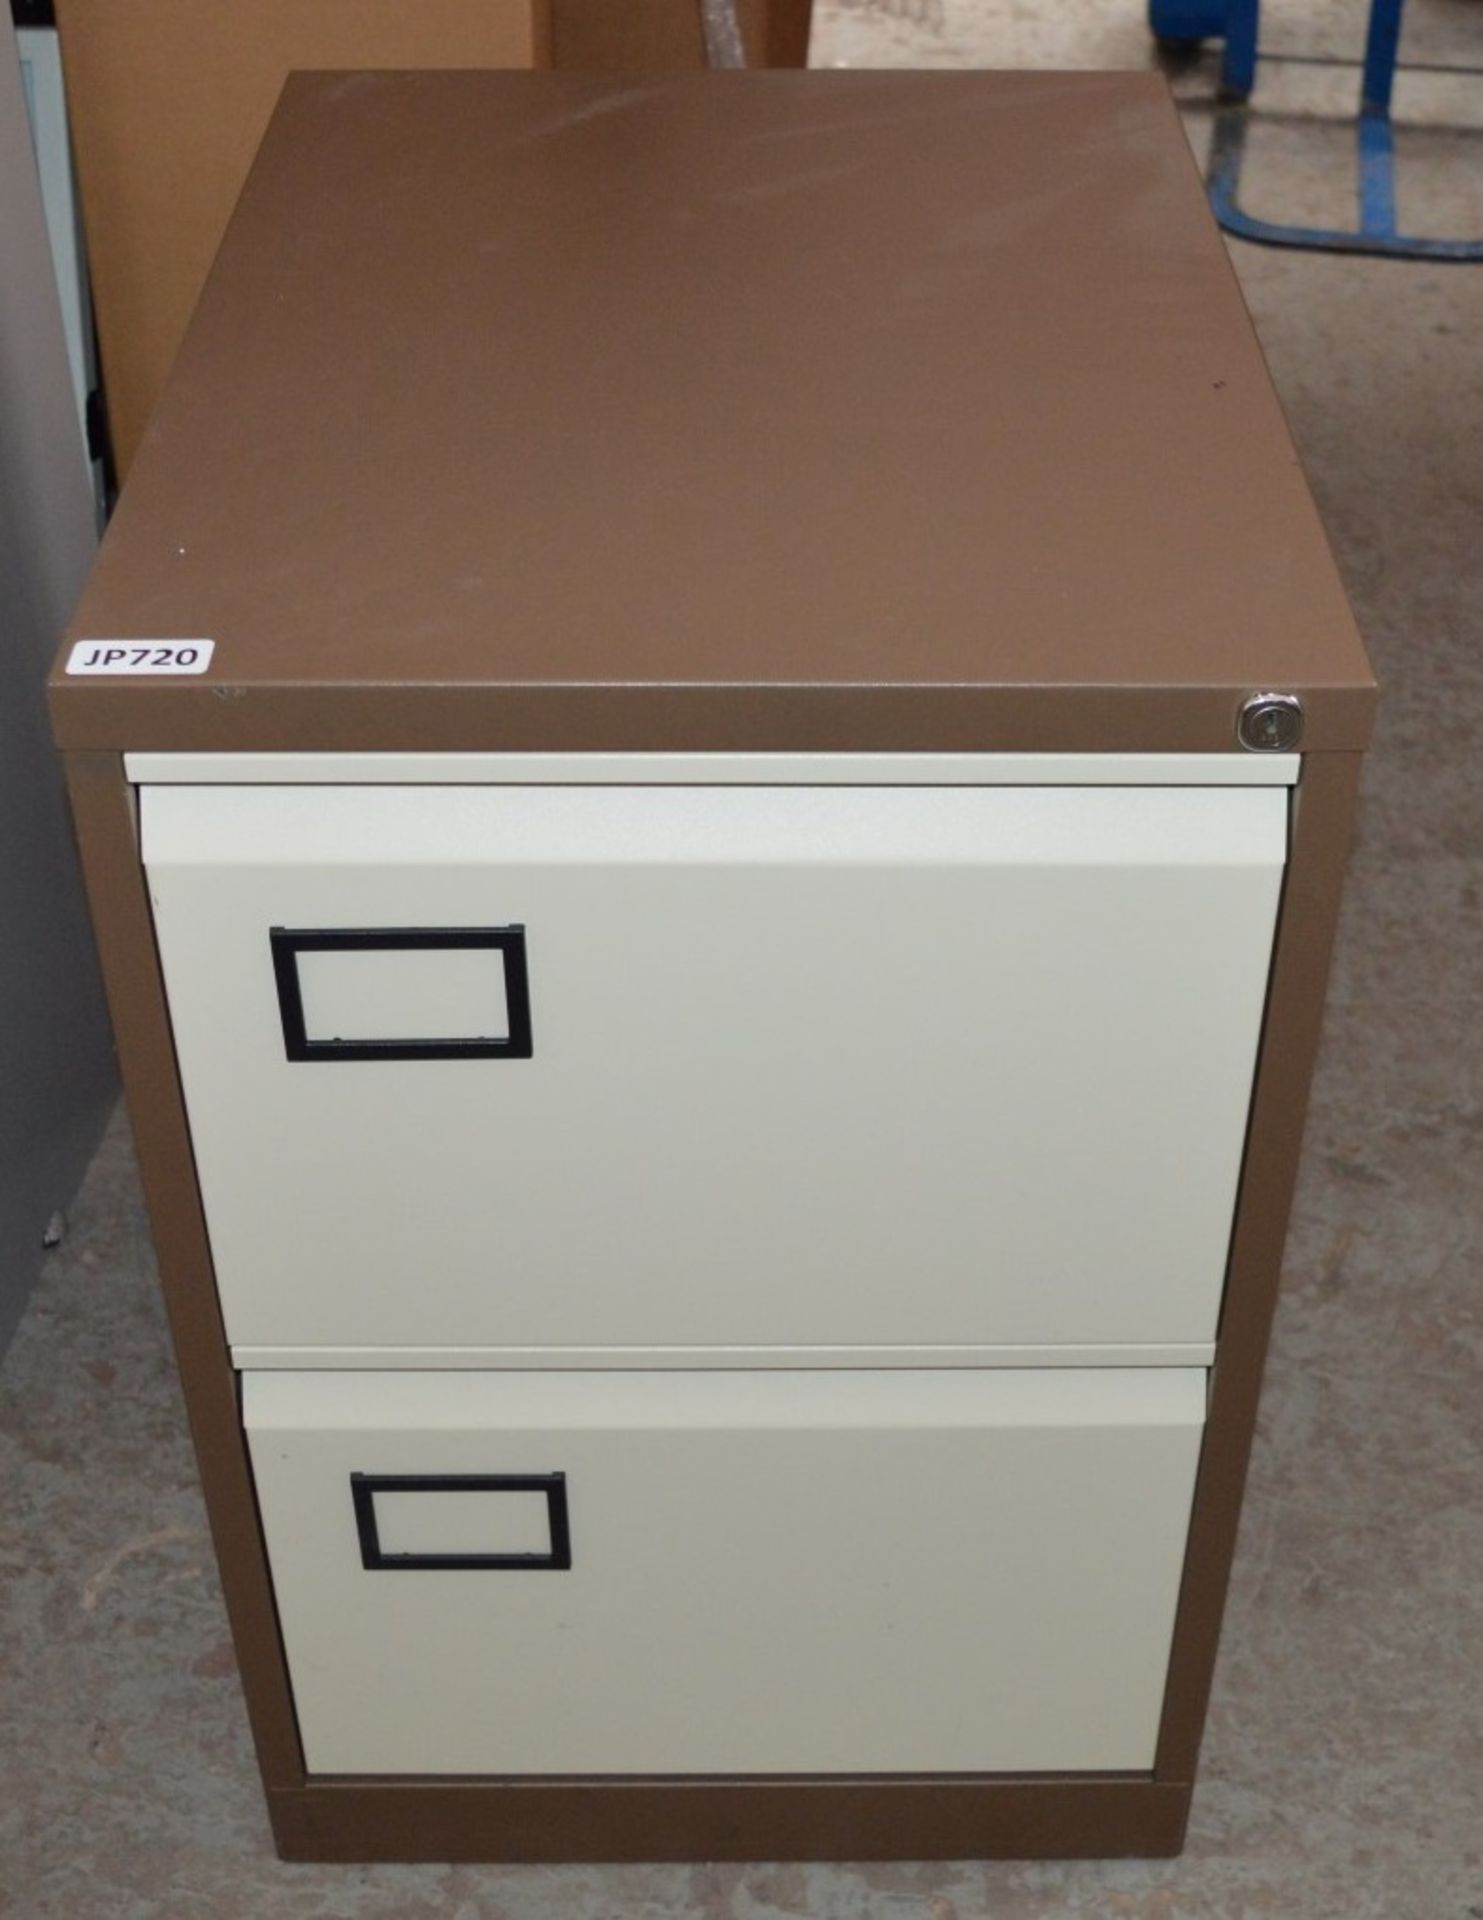 1 x Two Drawer Office Filing Cabinet - CL285 - Ref JP720 - Location: Altrincham WA14